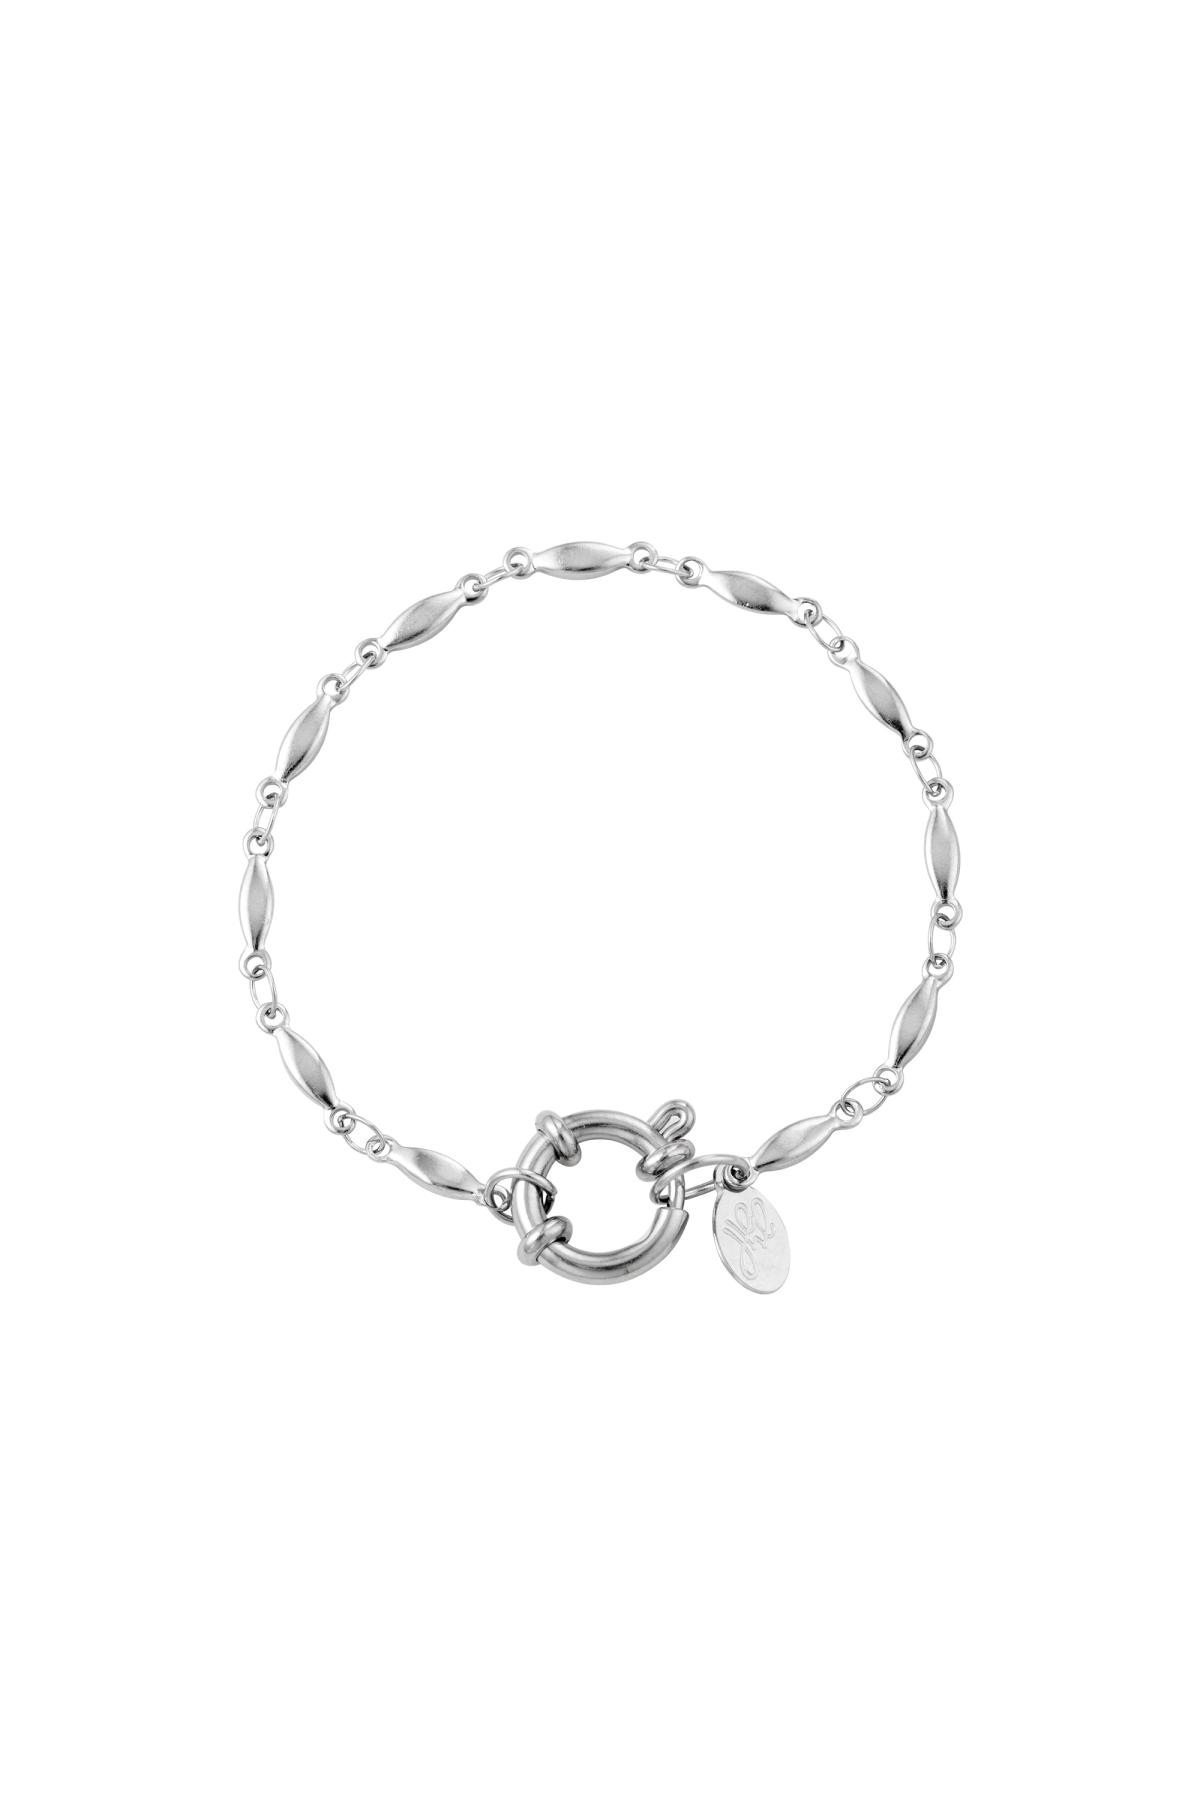 Bracelet oval chain Silver Stainless Steel h5 